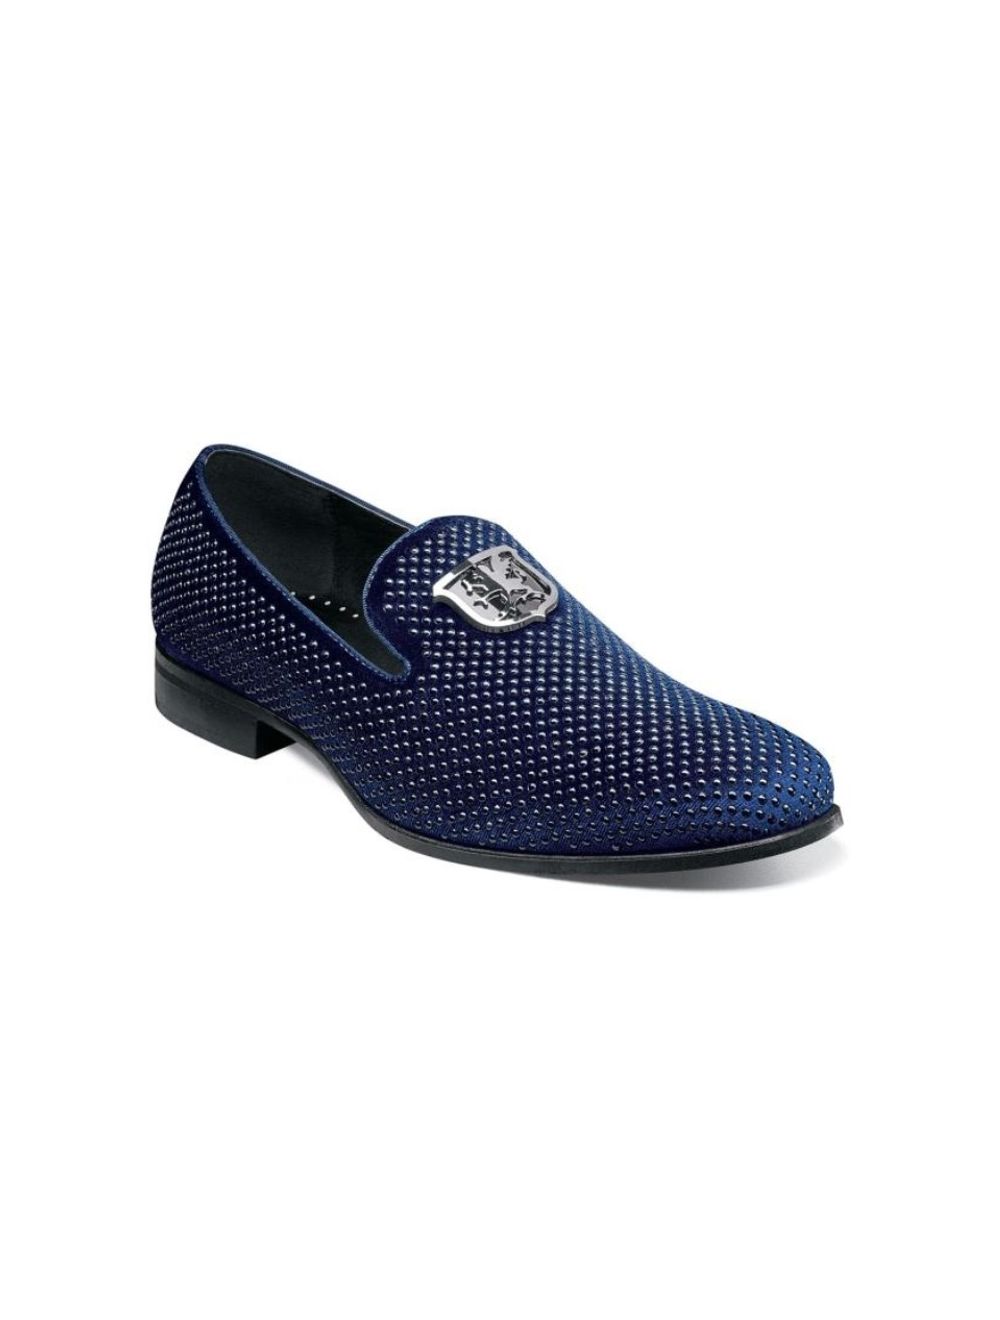 Stacy Adams Swagger Studded Plain Toe Loafer